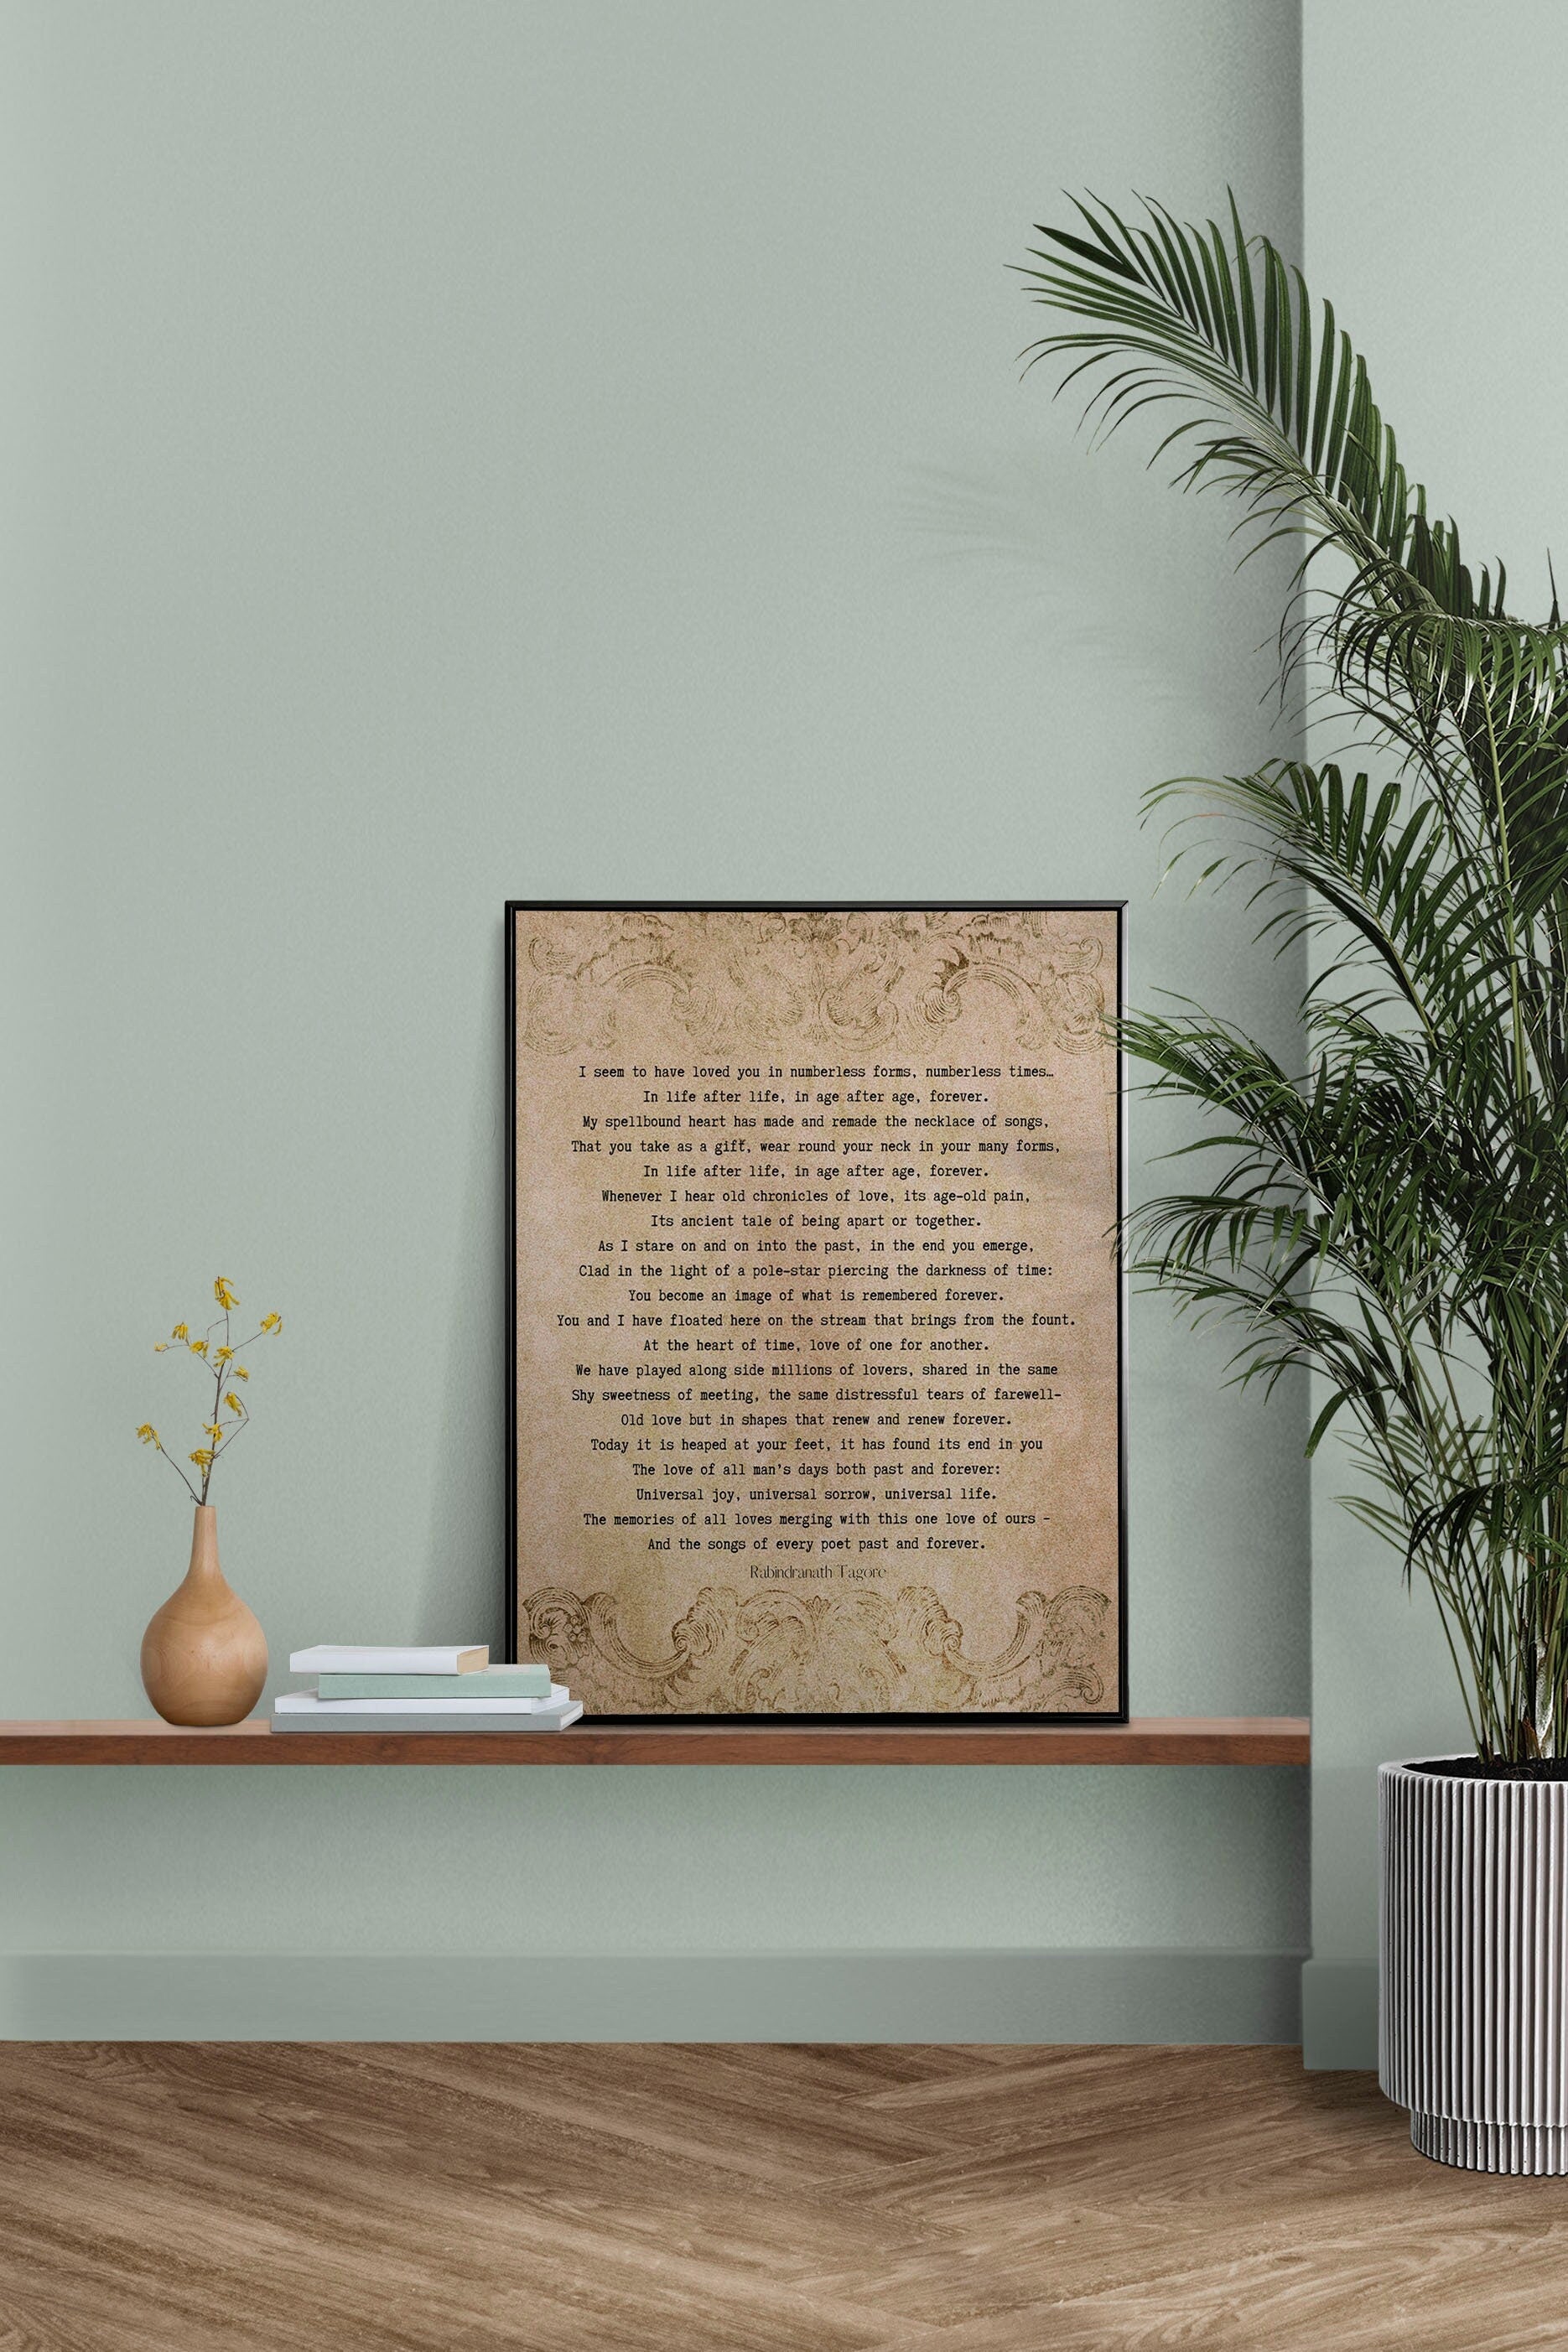 Rabindranath Tagore Poem Print - Unending Love Poetry Print in a Vintage Style Unframed and Framed Art, I seem to have loved you